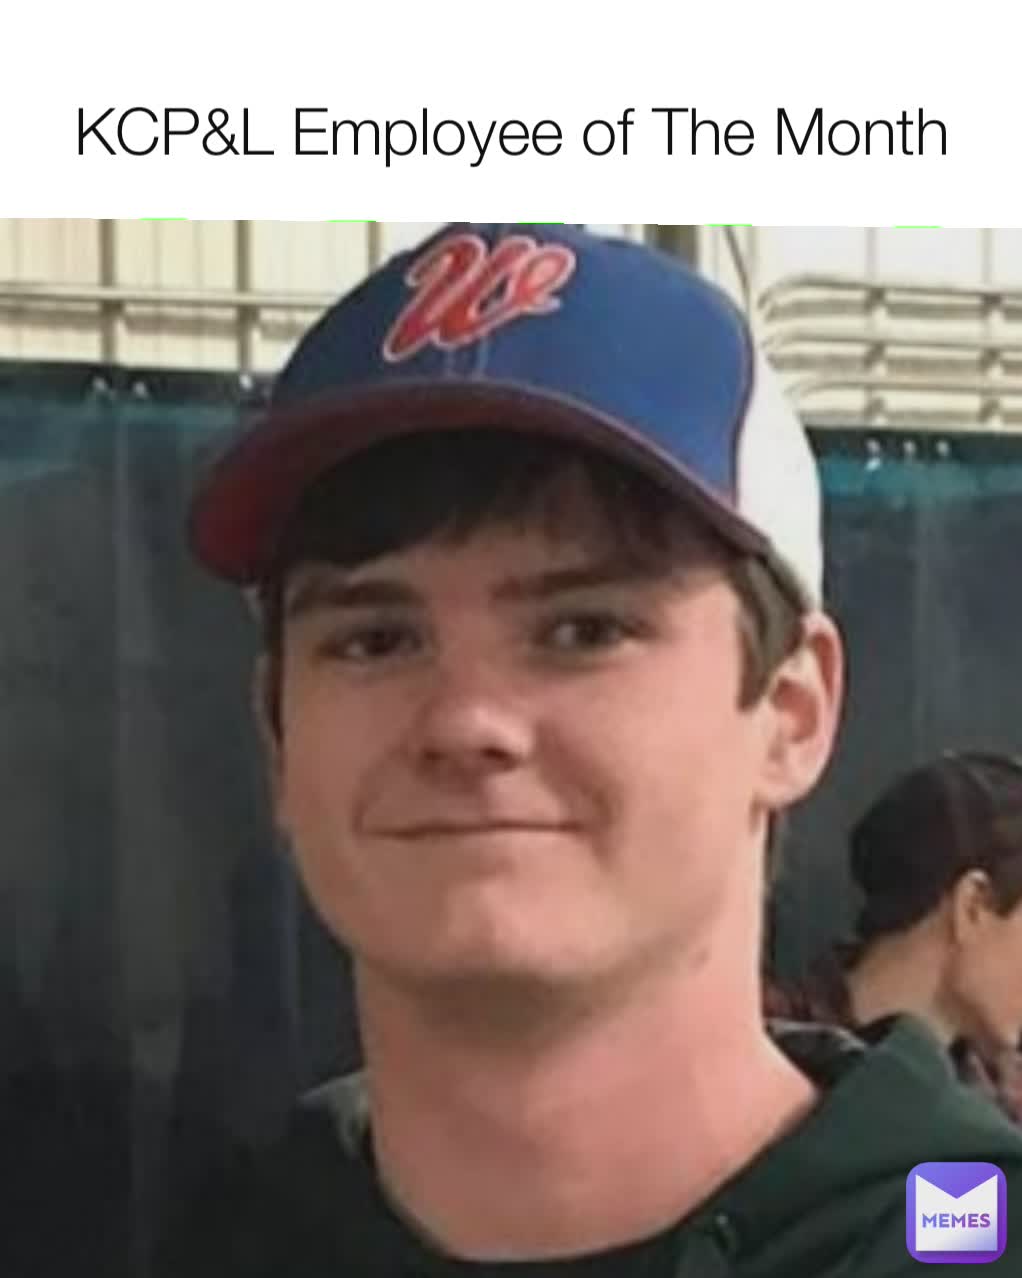 KCP&L Employee of The Month